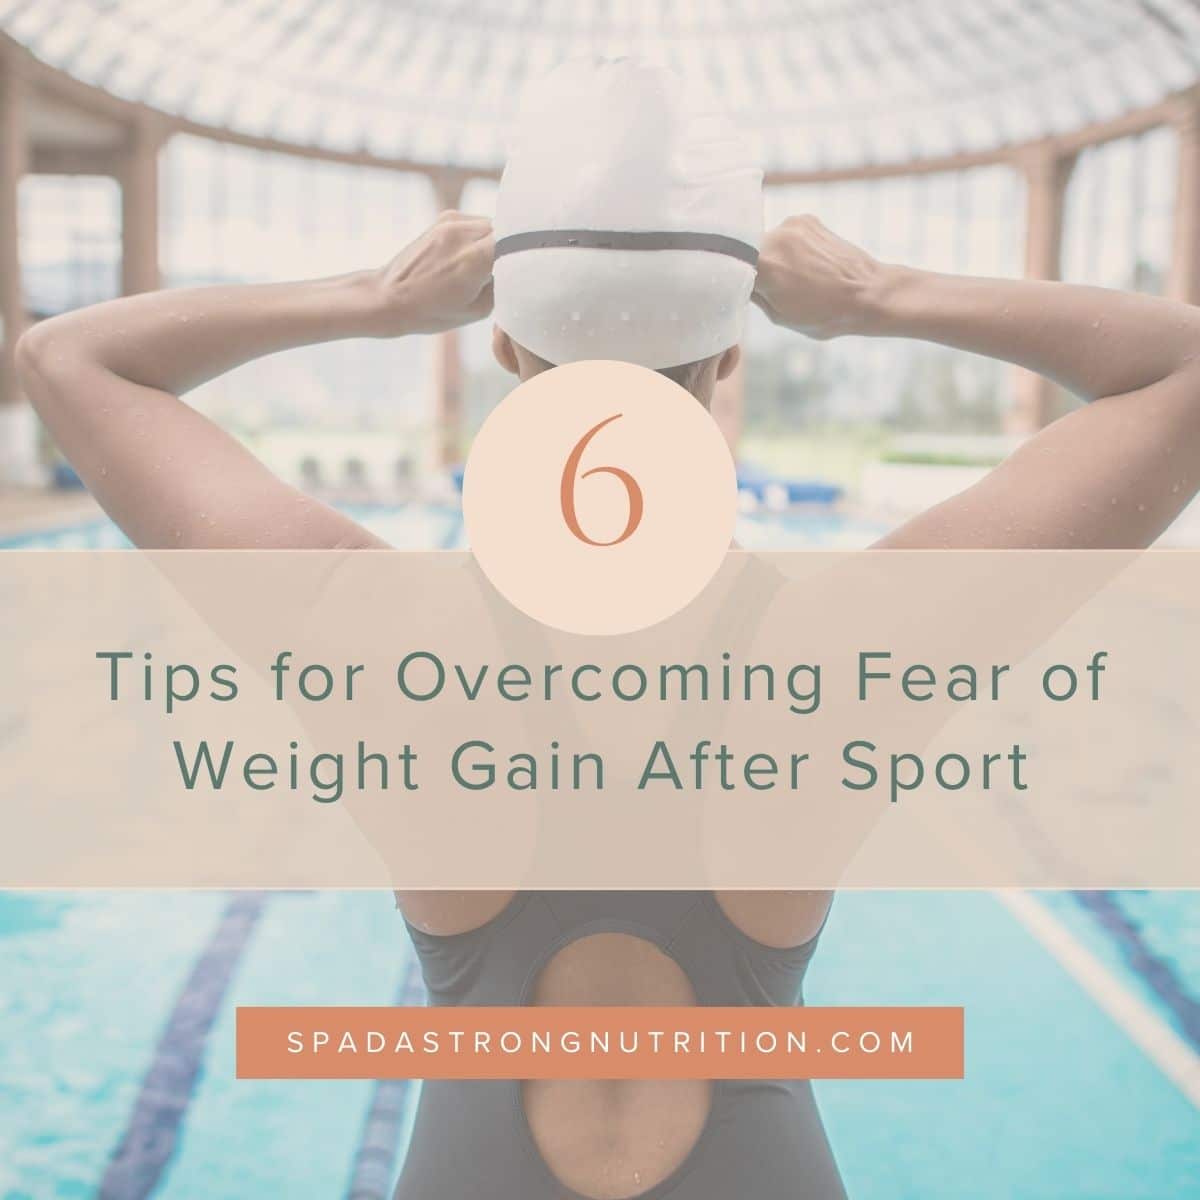 swimmer lowering her goggles with title saying "6 tips for overcoming fear of weight gain after sport"